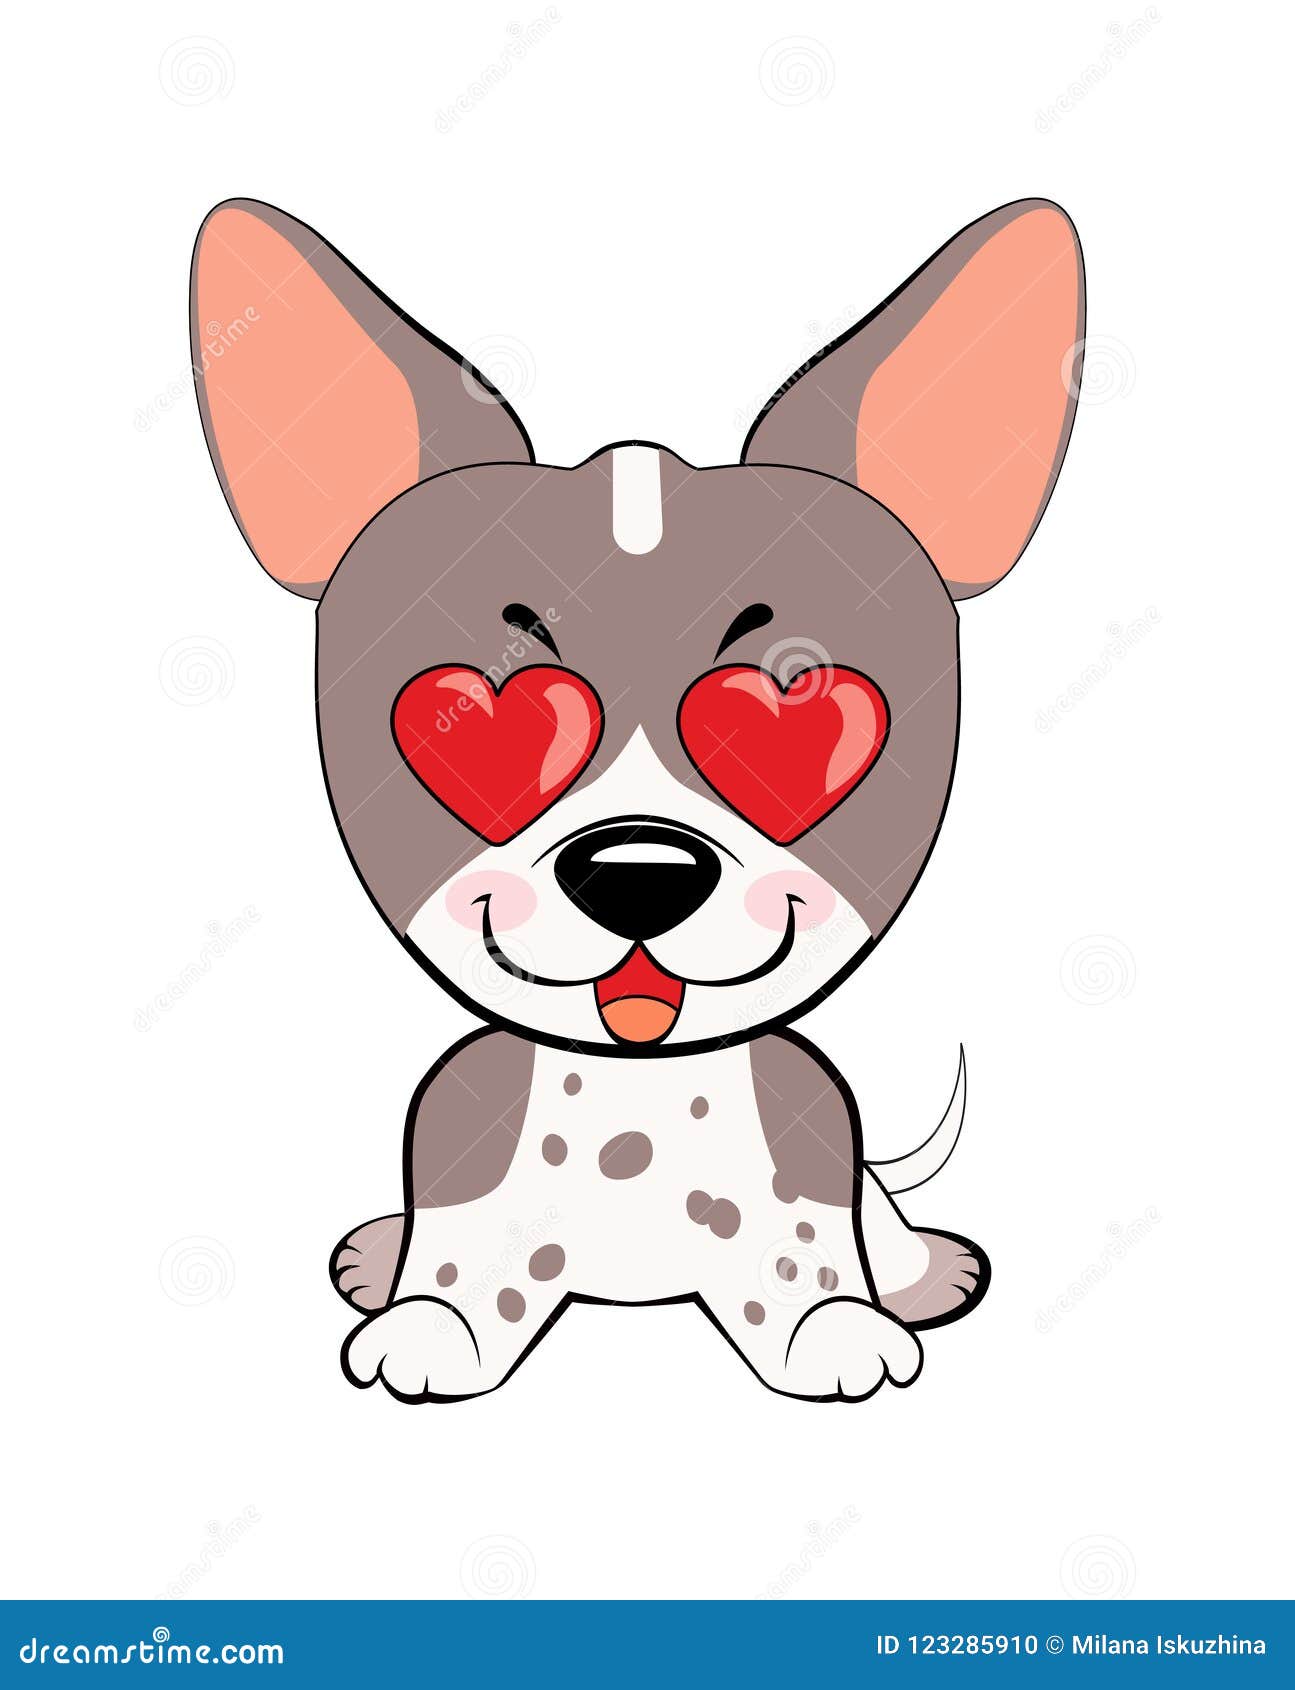 American Style Cartoon Nudes - In Love, Kiss, Romantic, Relationship, Happy, with Heart Eyes Emotions. Dog  Character Illustrations in Vector. Dog American Naked Stock Vector -  Illustration of canine, happy: 123285910